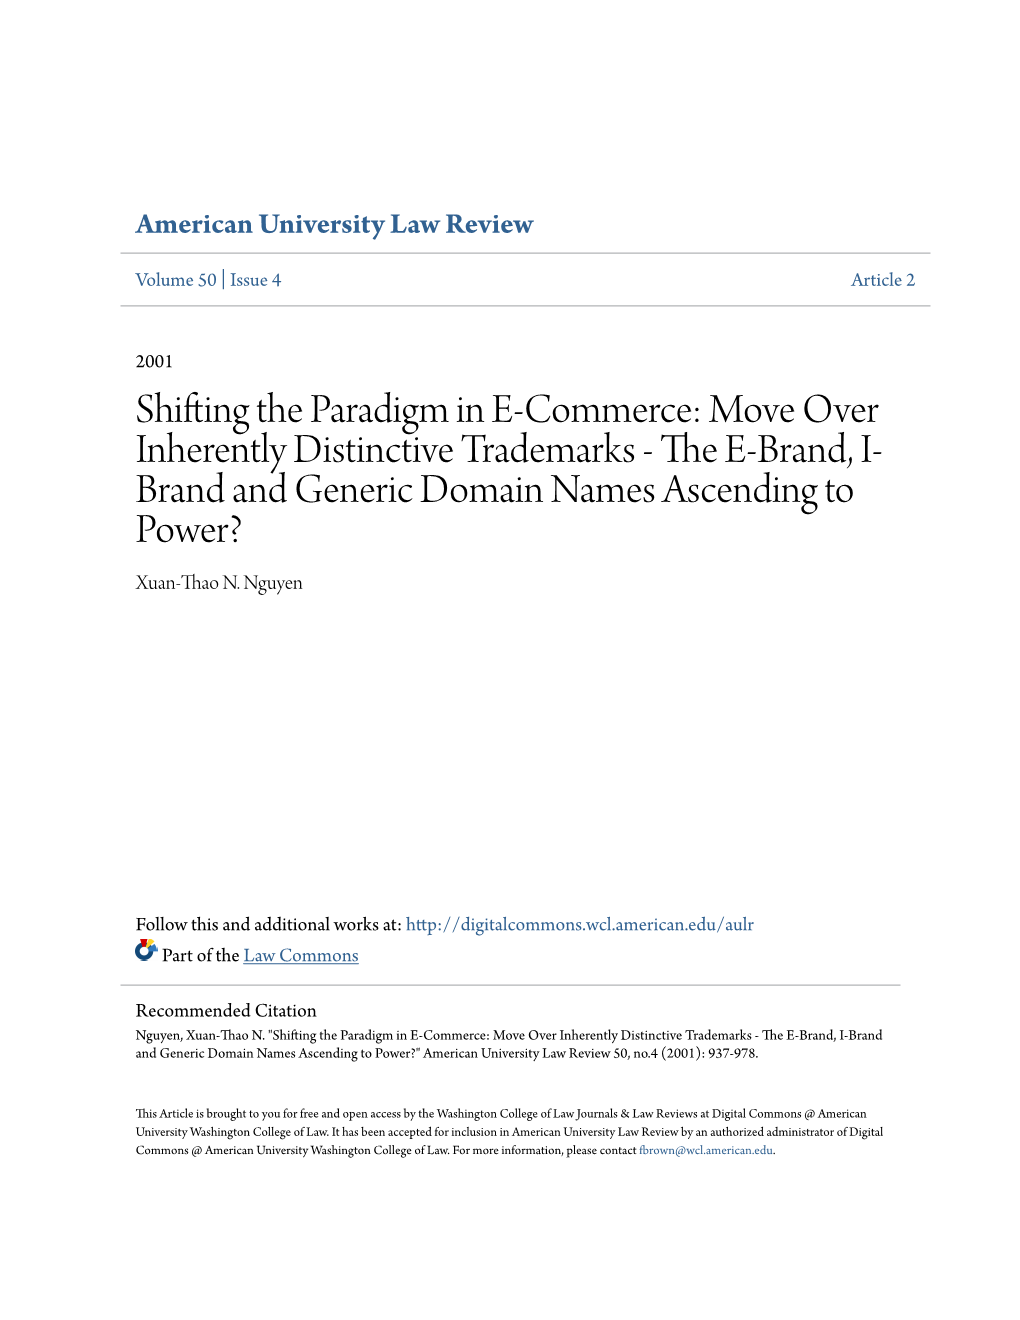 The E-Brand, I-Brand and Generic Domain Names Ascending to Power?" American University Law Review 50, No.4 (2001): 937-978